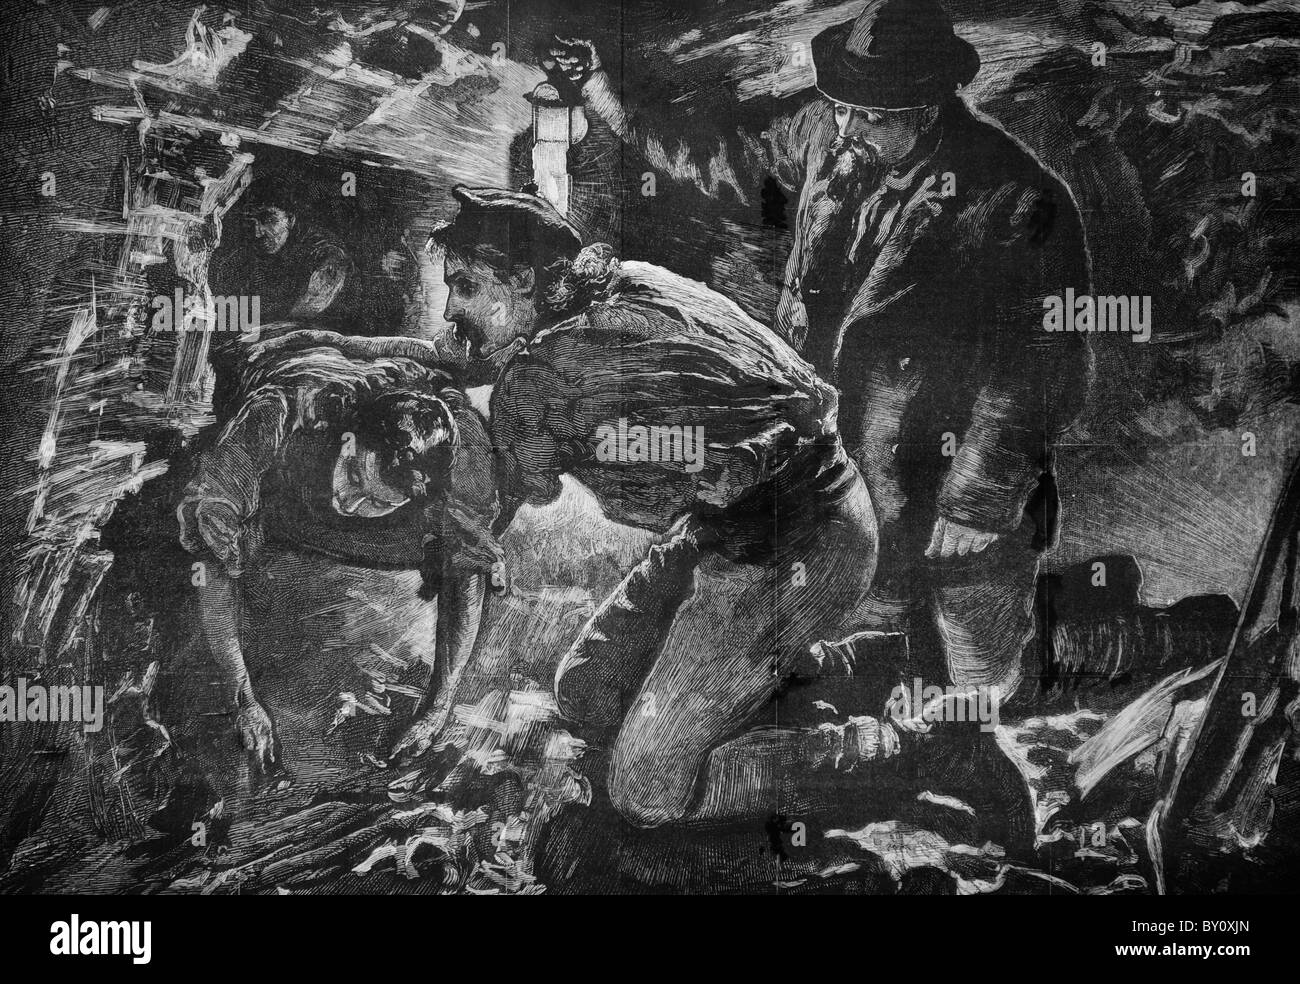 Troedyrhiw Colliery men rescued from flooded mine being trapped for 10 days original Victorian engraving dated 28th April 1877 South Wales UK Stock Photo